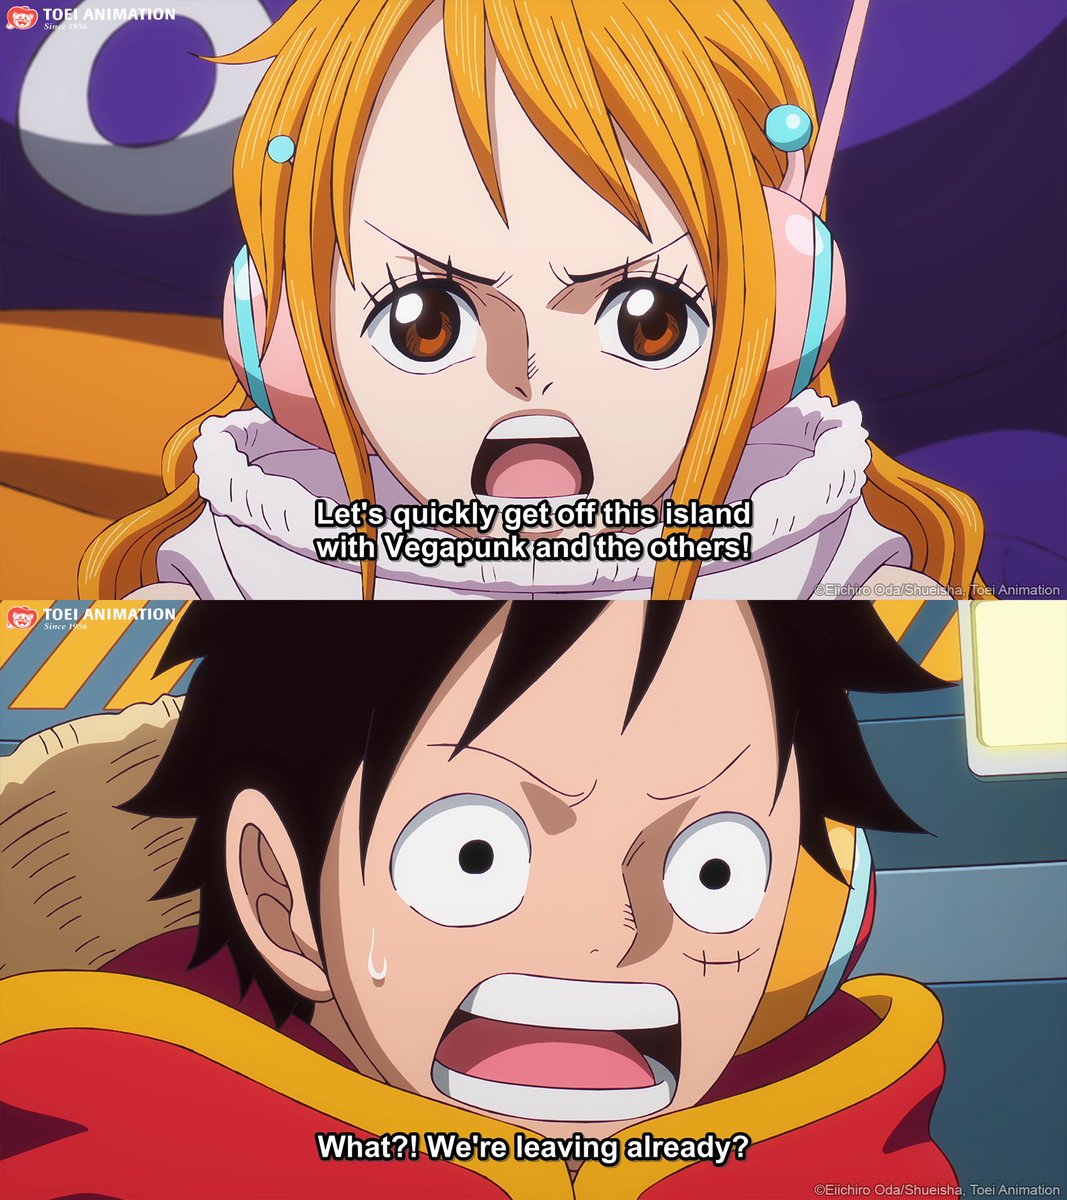 But you just got here! (via @OnePieceAnime)